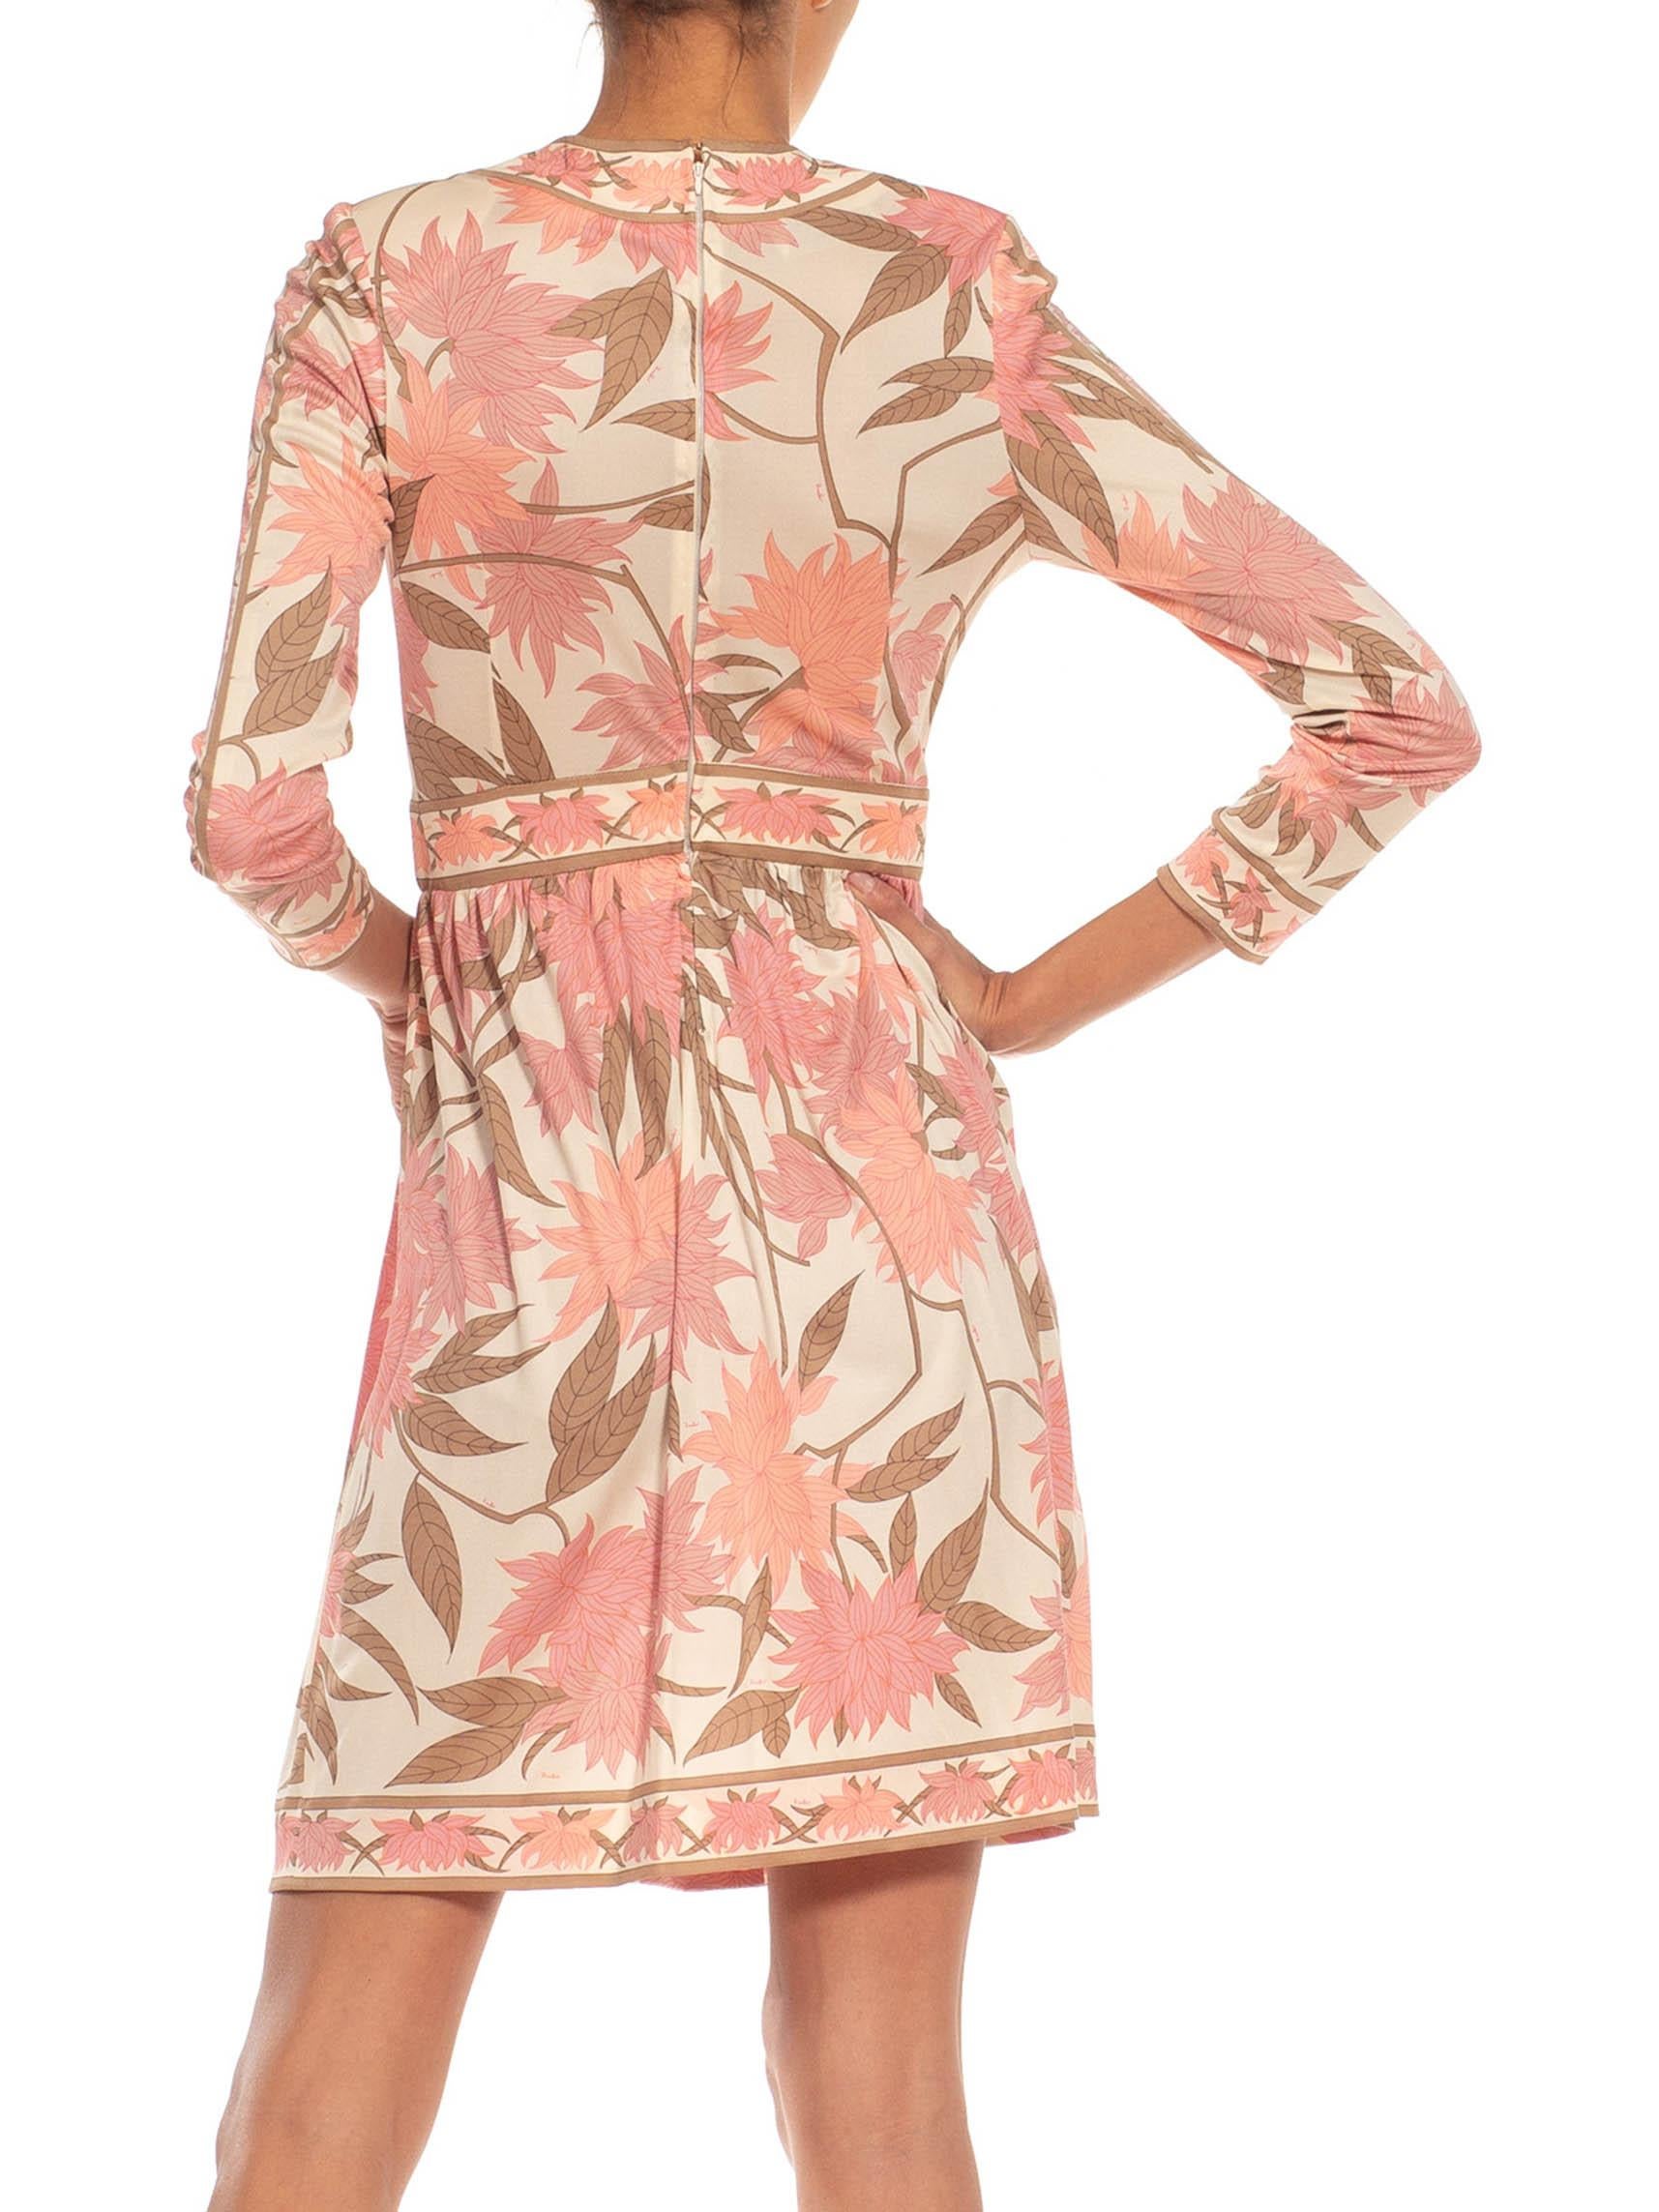 1970S EMILIO PUCCI Cream, Brown & Pink Floral Silk Rayon Blend Signed Dress For Sale 2